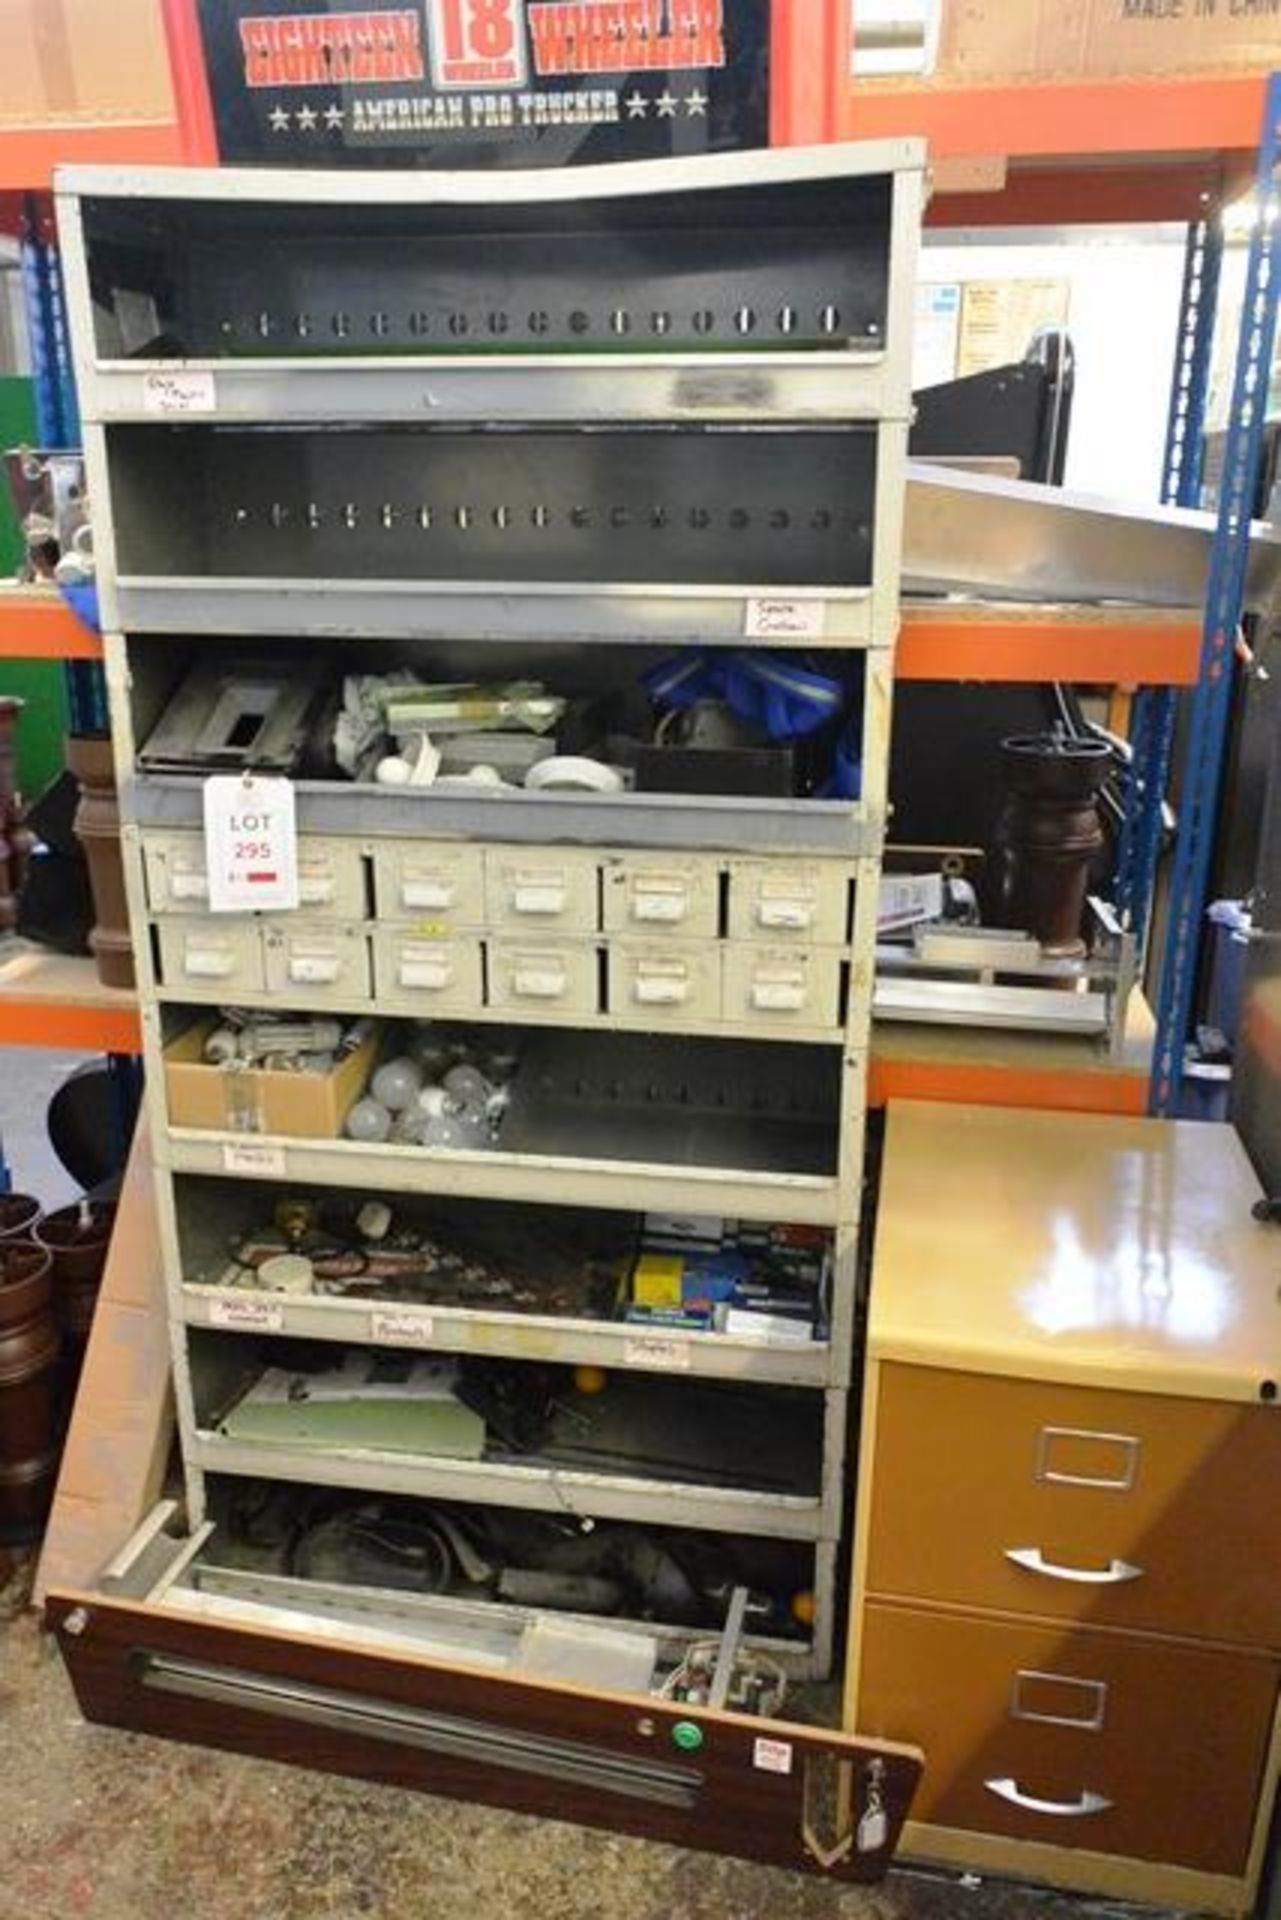 Steel multi shelf/drawer storage unit and 2 drawer filing cabinet, with contents, including